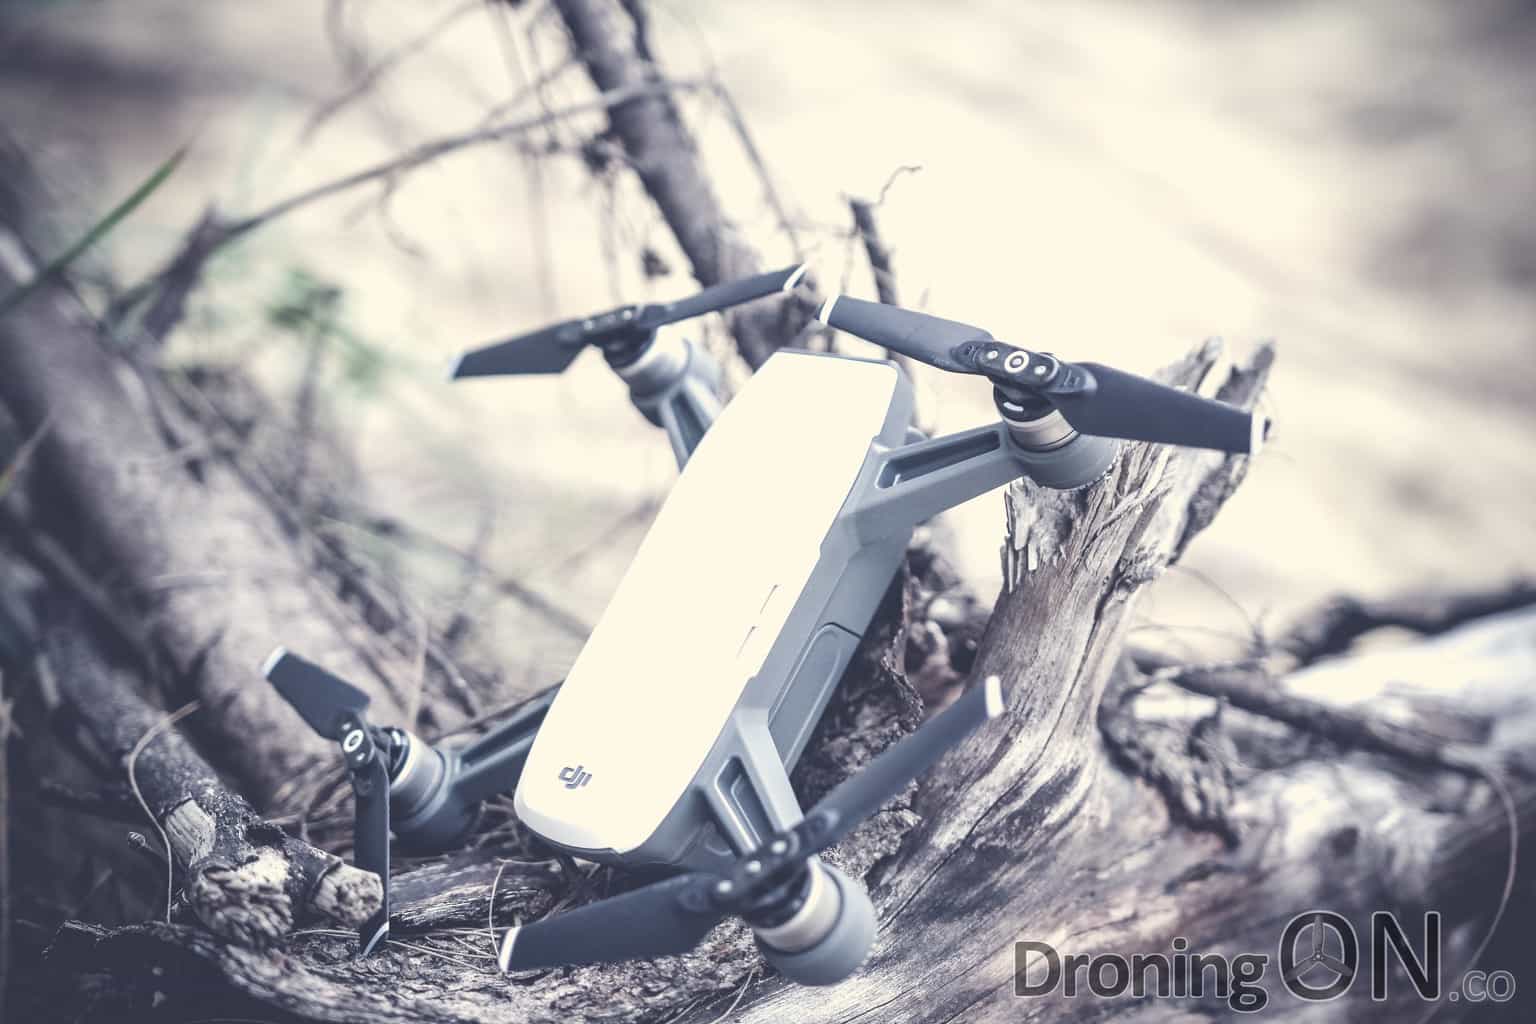 A crashed DJI Spark, following reports of fly-away and power loss issues.